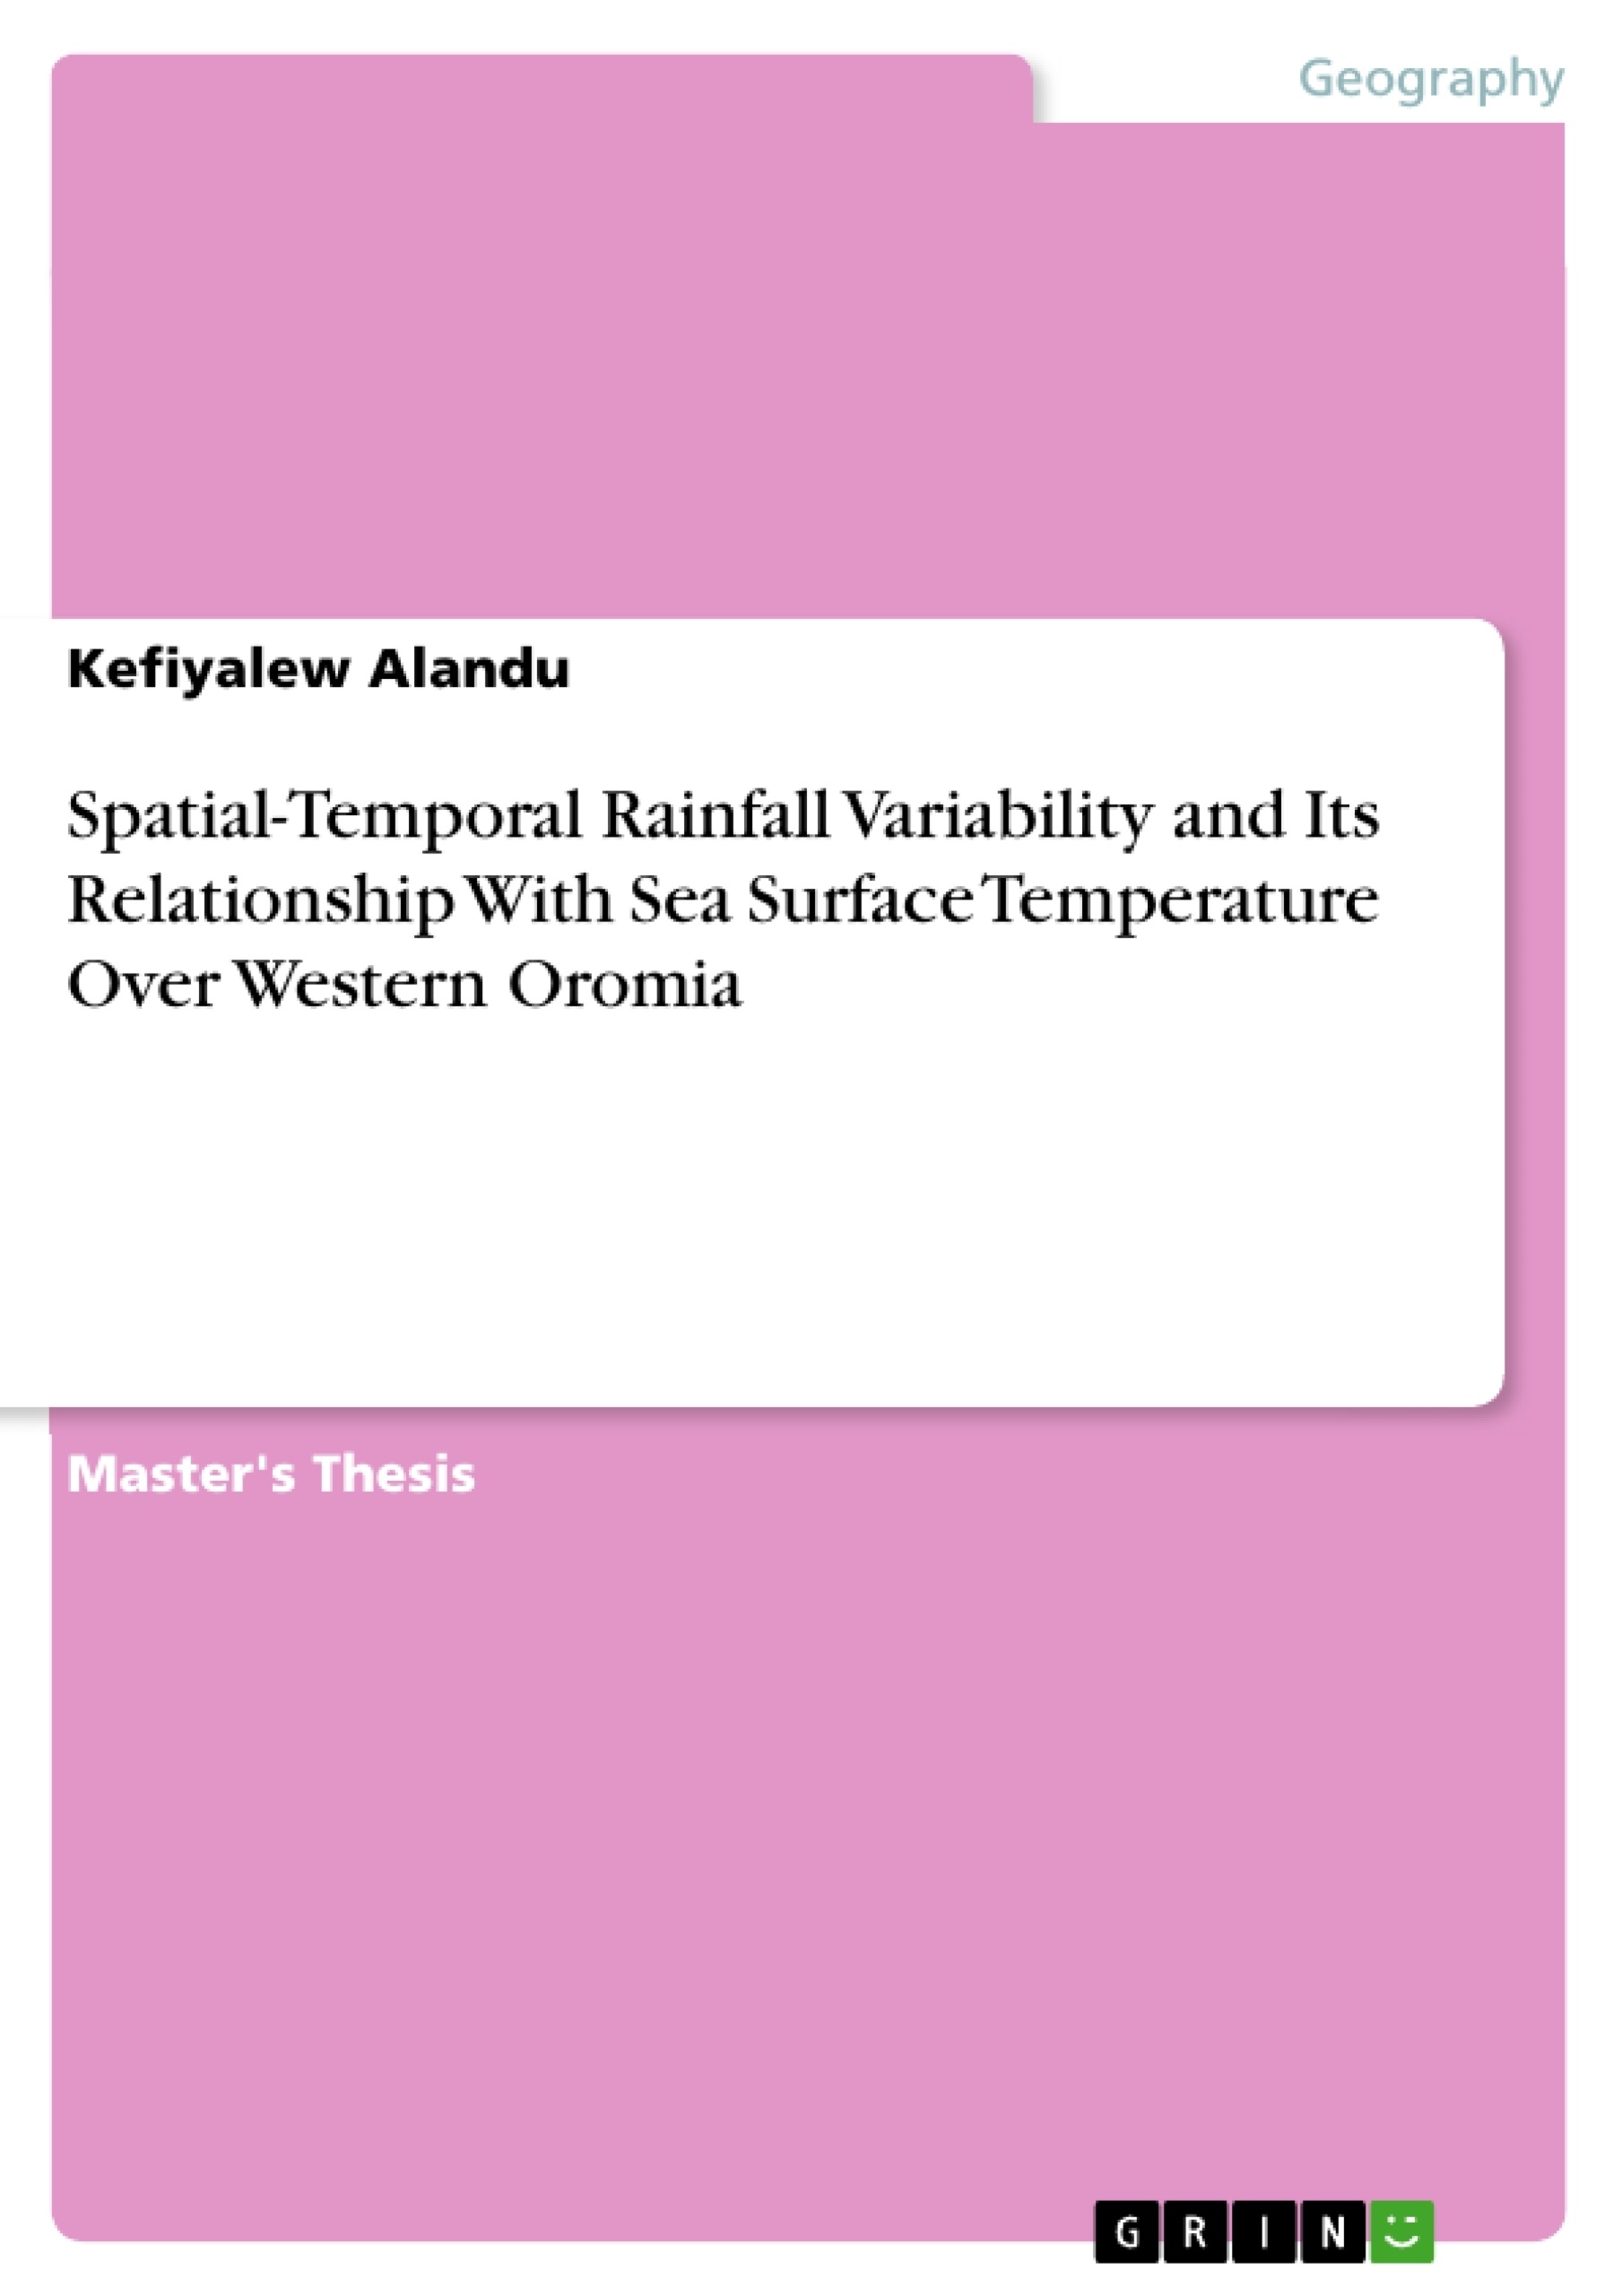 Title: Spatial-Temporal Rainfall Variability and Its Relationship With Sea Surface Temperature Over Western Oromia